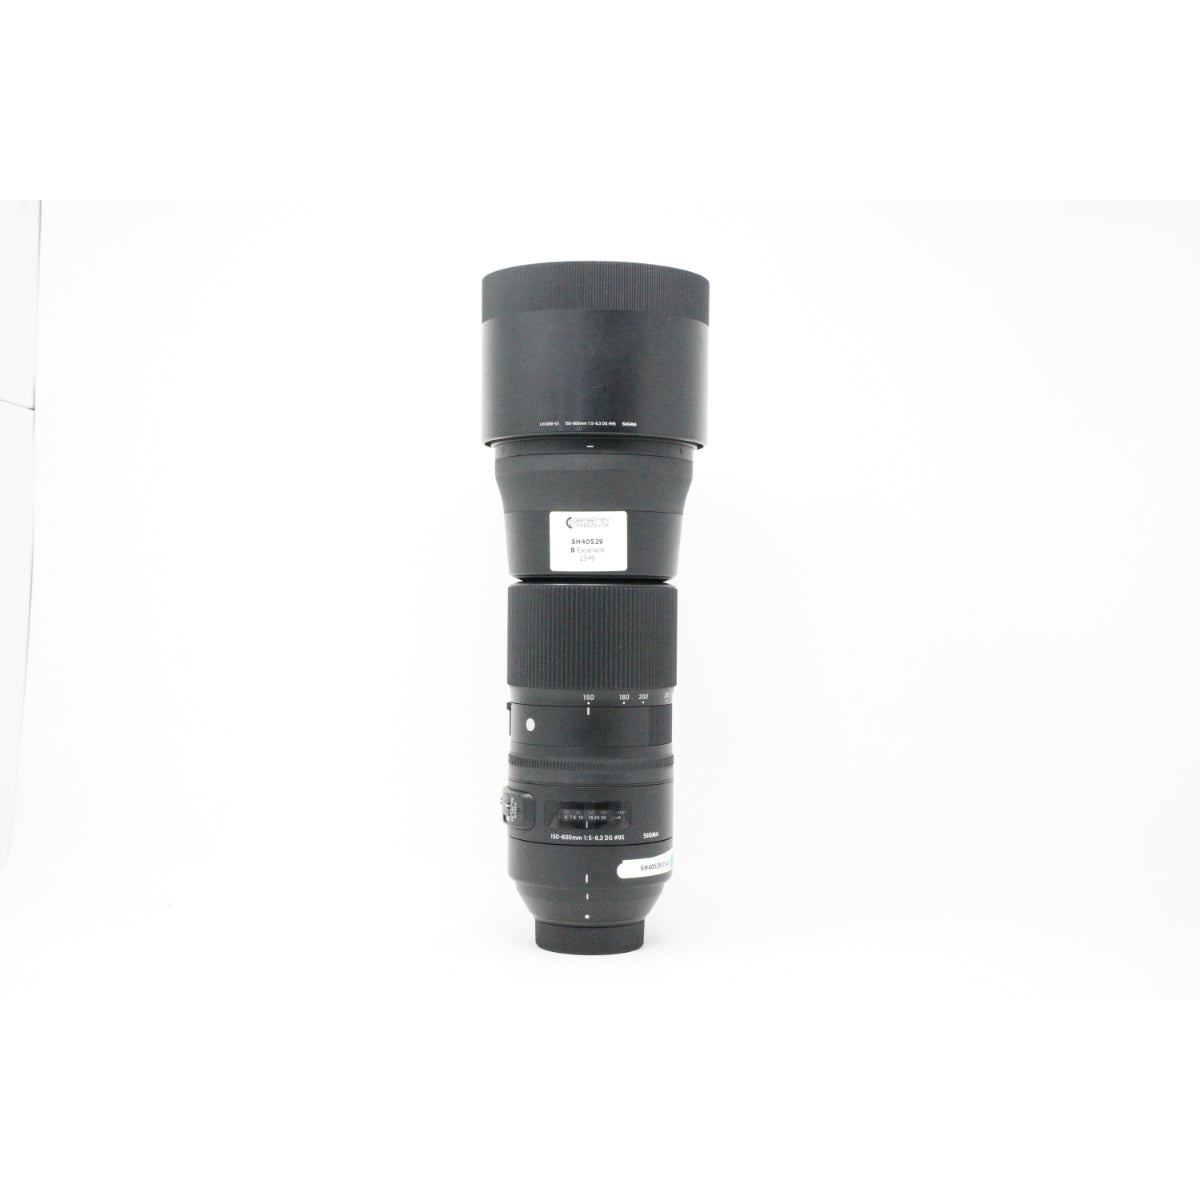 Used Sigma 150-600mm F5-6.3 DG Contemporary lens in Nikon Fit (Boxed